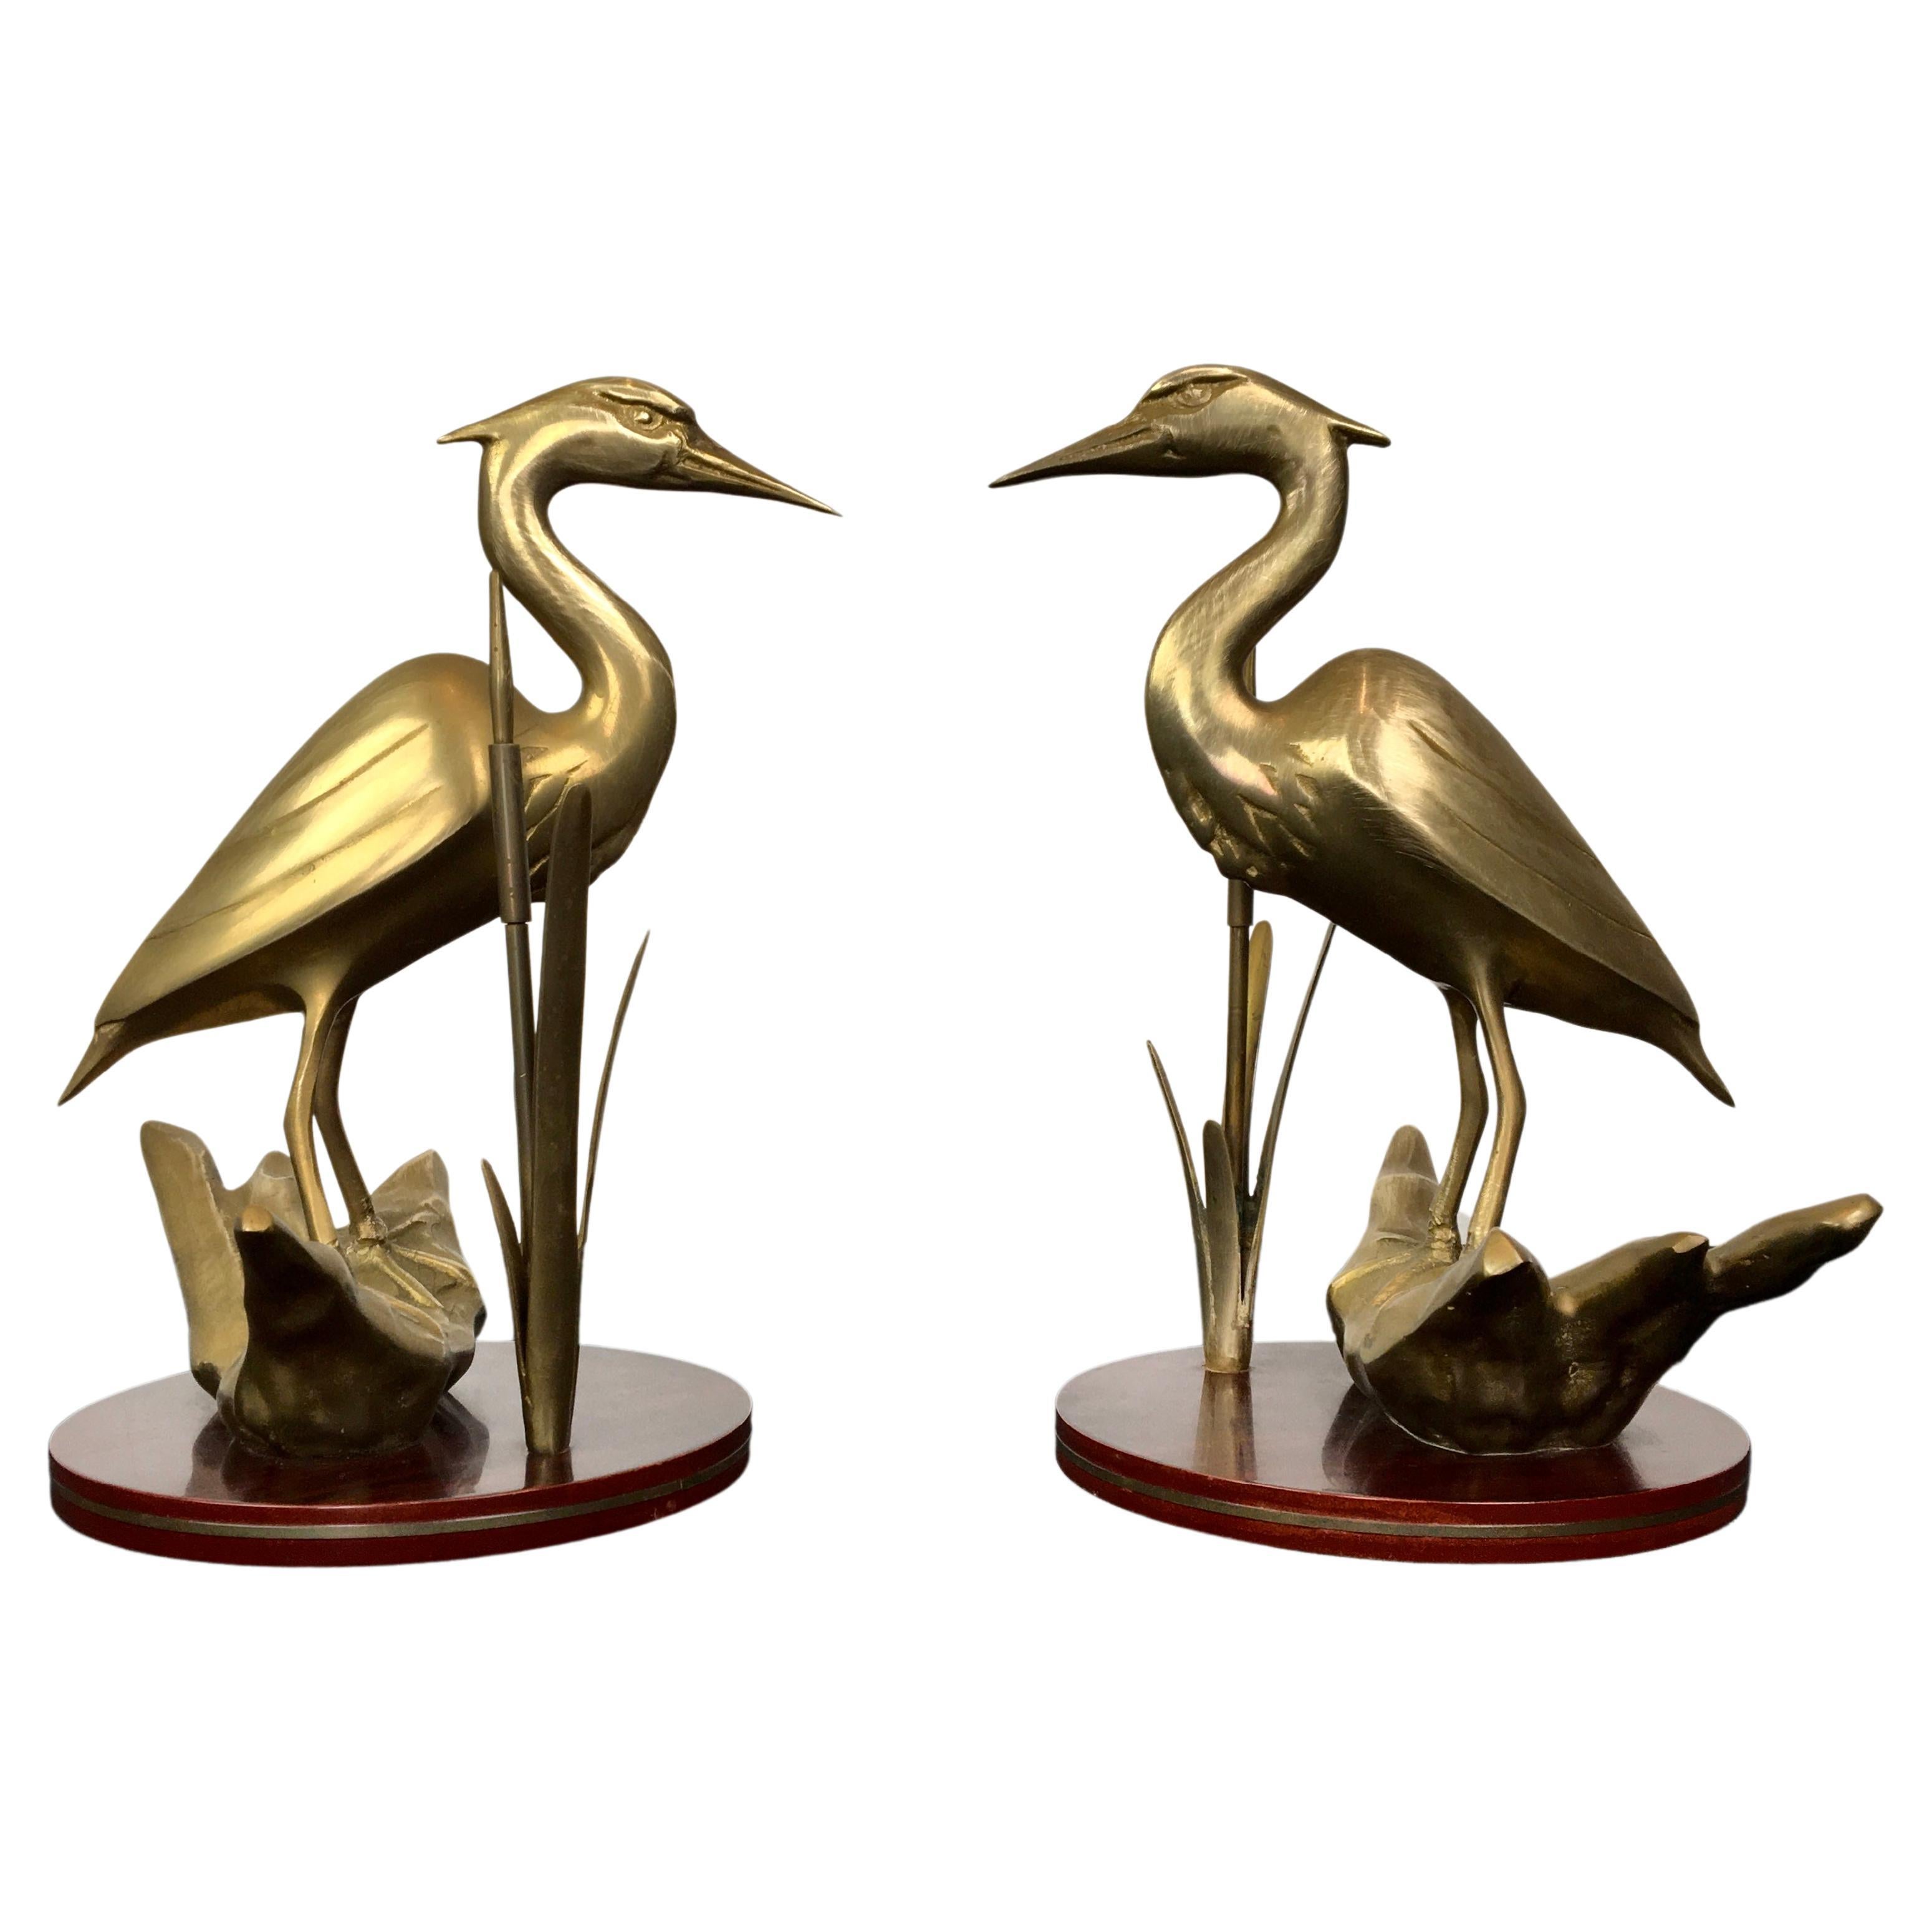 Pair of Brass Cranes Sculptures on Wood For Sale